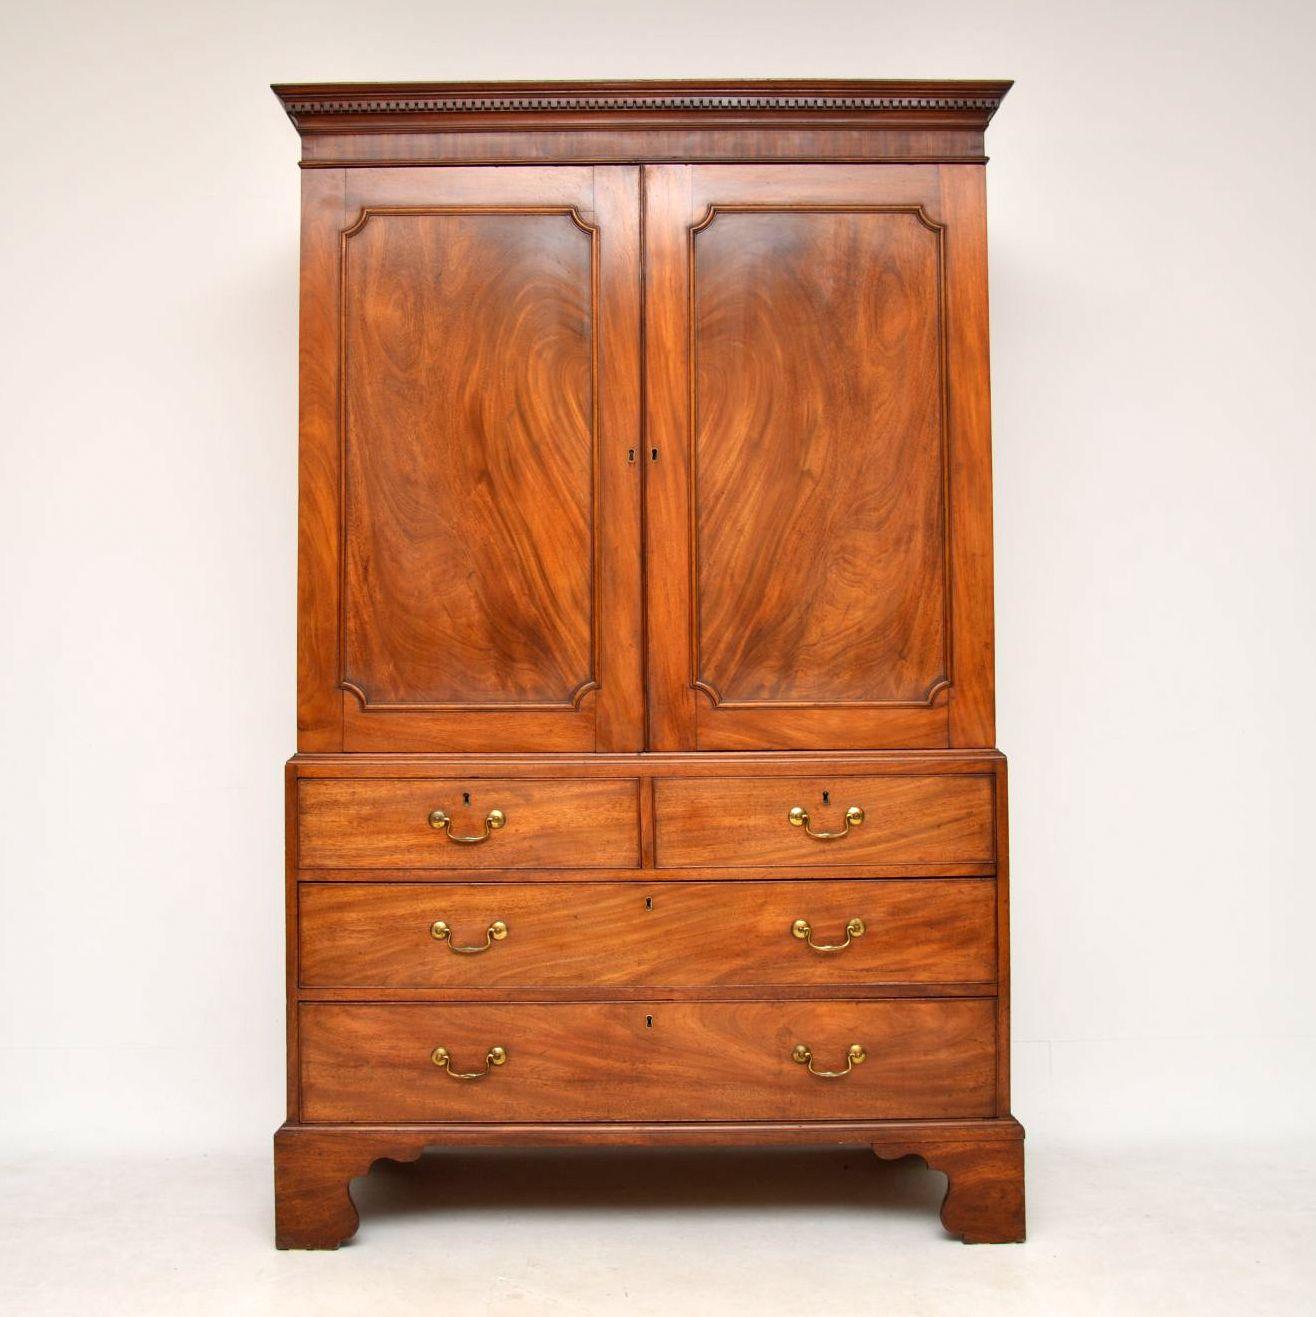 Antique George III mahogany linen press in really good original condition and dating from around the 1790 period or even a bit earlier. It has a lovely color and wonderful figuring in the wood, especially in the door panels which are solid mahogany.